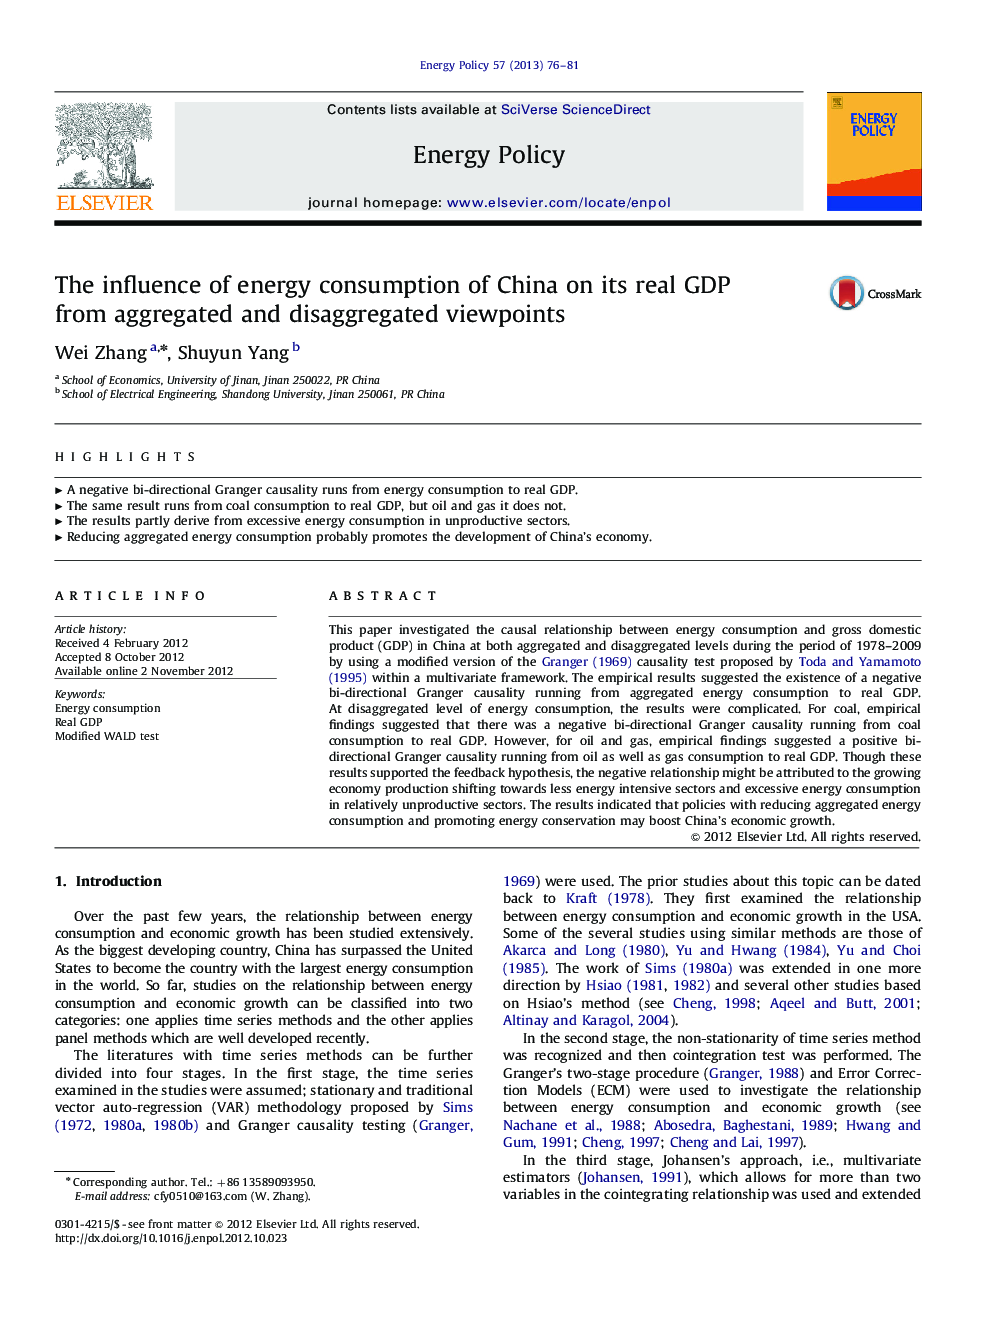 The influence of energy consumption of China on its real GDP from aggregated and disaggregated viewpoints